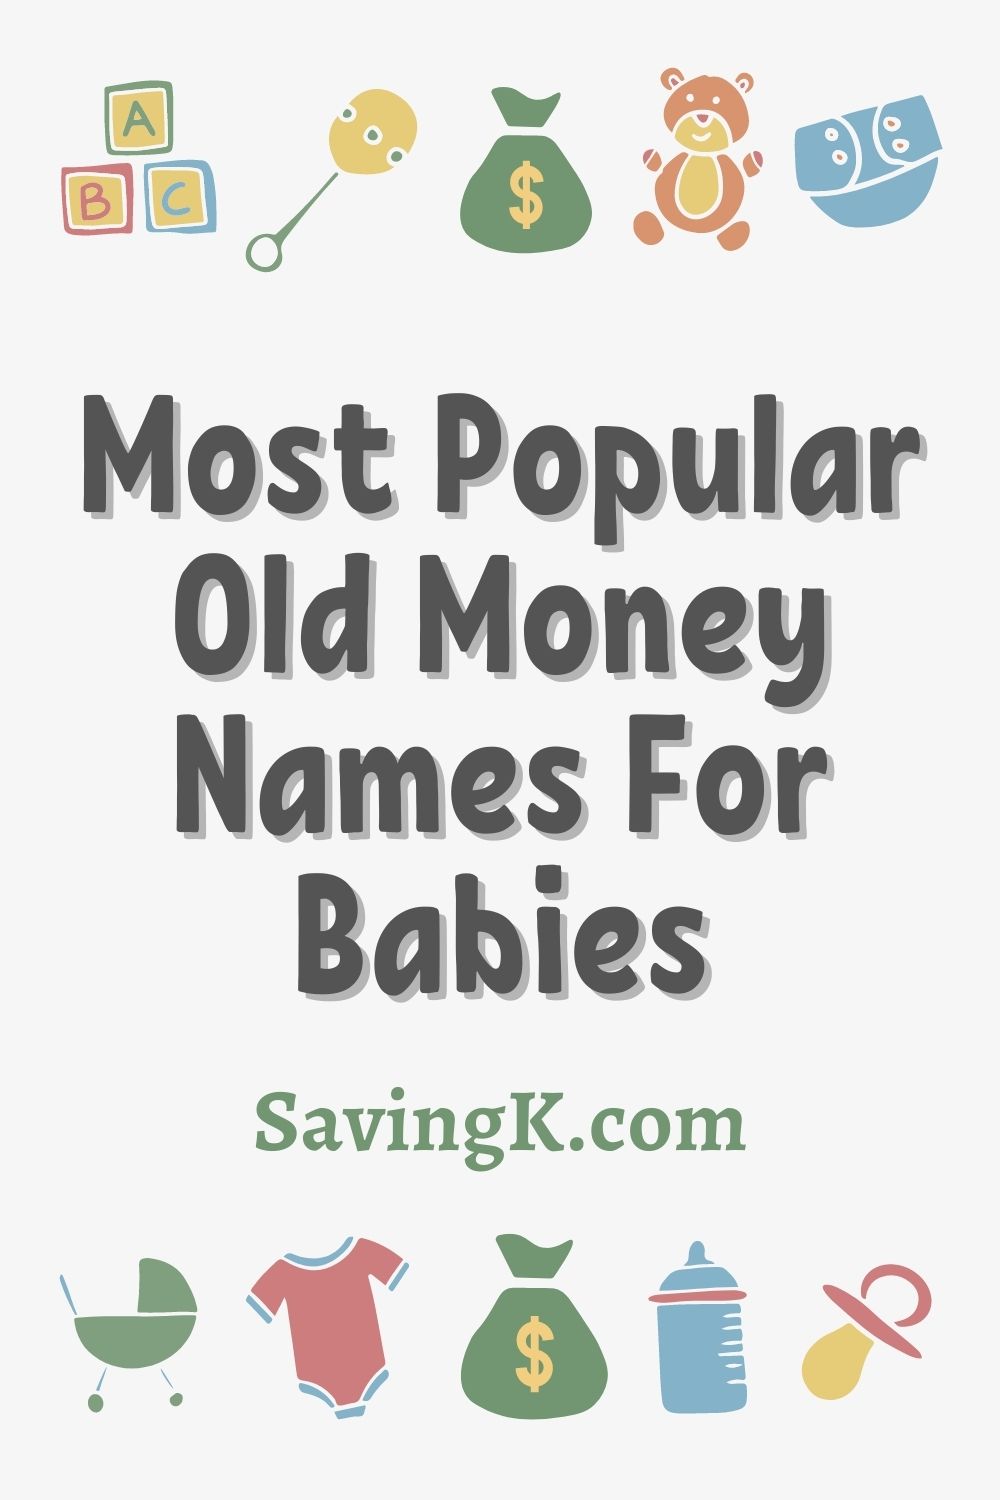 Most Popular Old Money Names For Babies